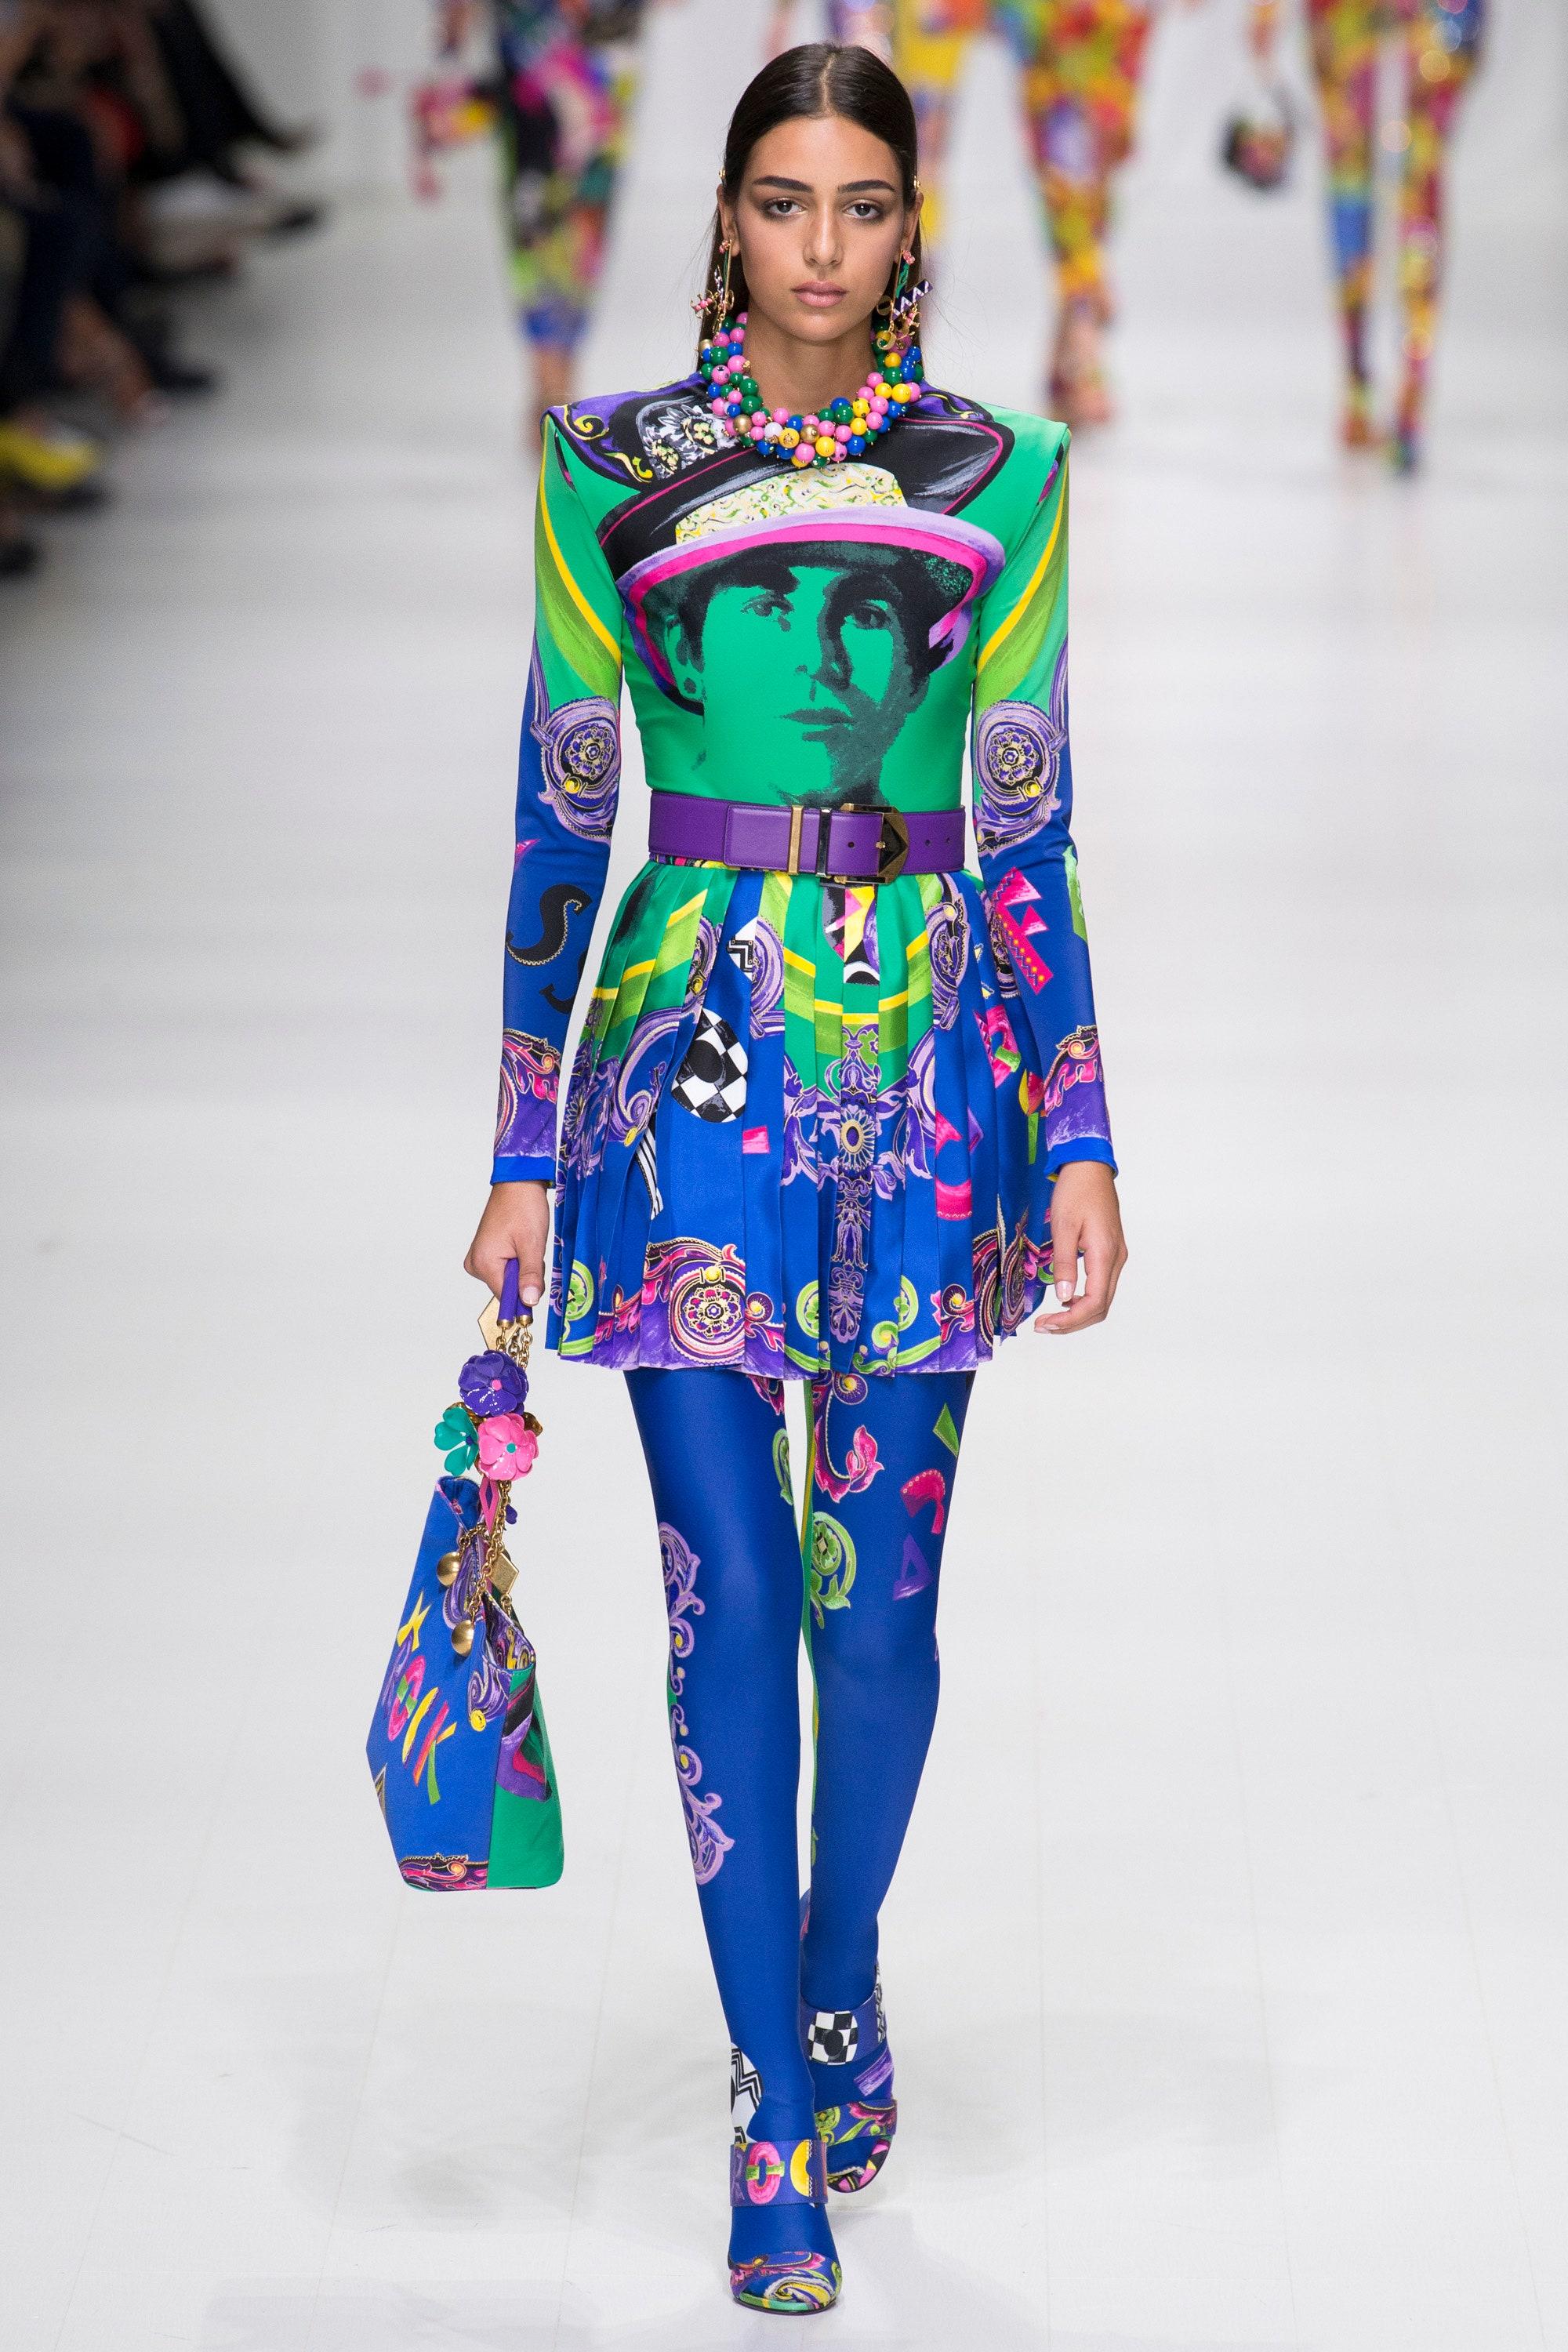 VERSACE

S/S 2018 Look # 55 
Tribute 1990 Pop Art Vogue print 3D enamel flower chain tote
Brand: Versace
Designer: Donatella Versace
Collection: Spring Summer 2018
Model Name / Style: Vogue tote
Material: Fabric
Color: Multicolour
Pattern: Abstract;